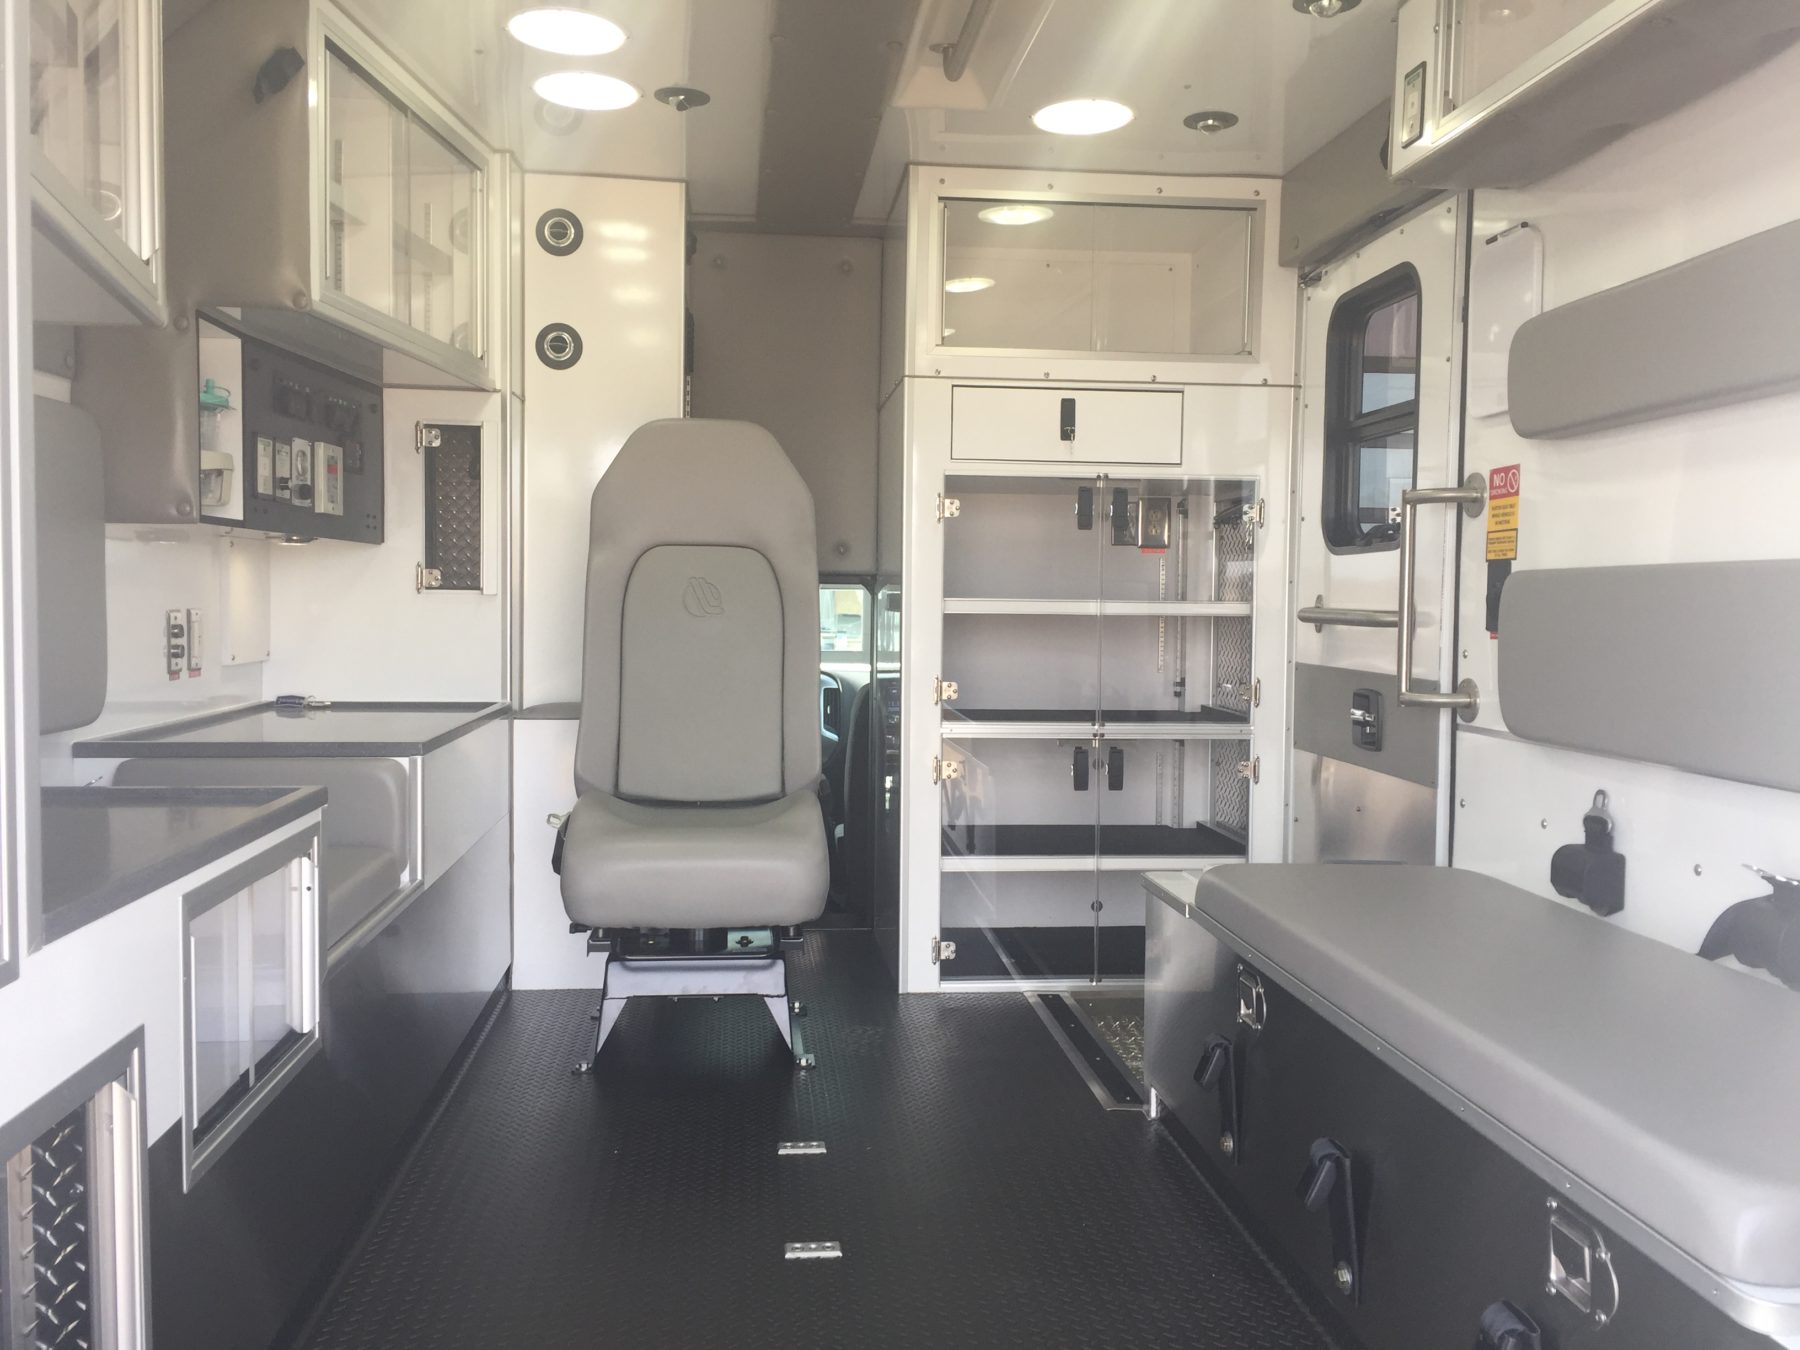 2019 Chevrolet K3500 4x4 Type 1 Ambulance For Sale – Picture 2